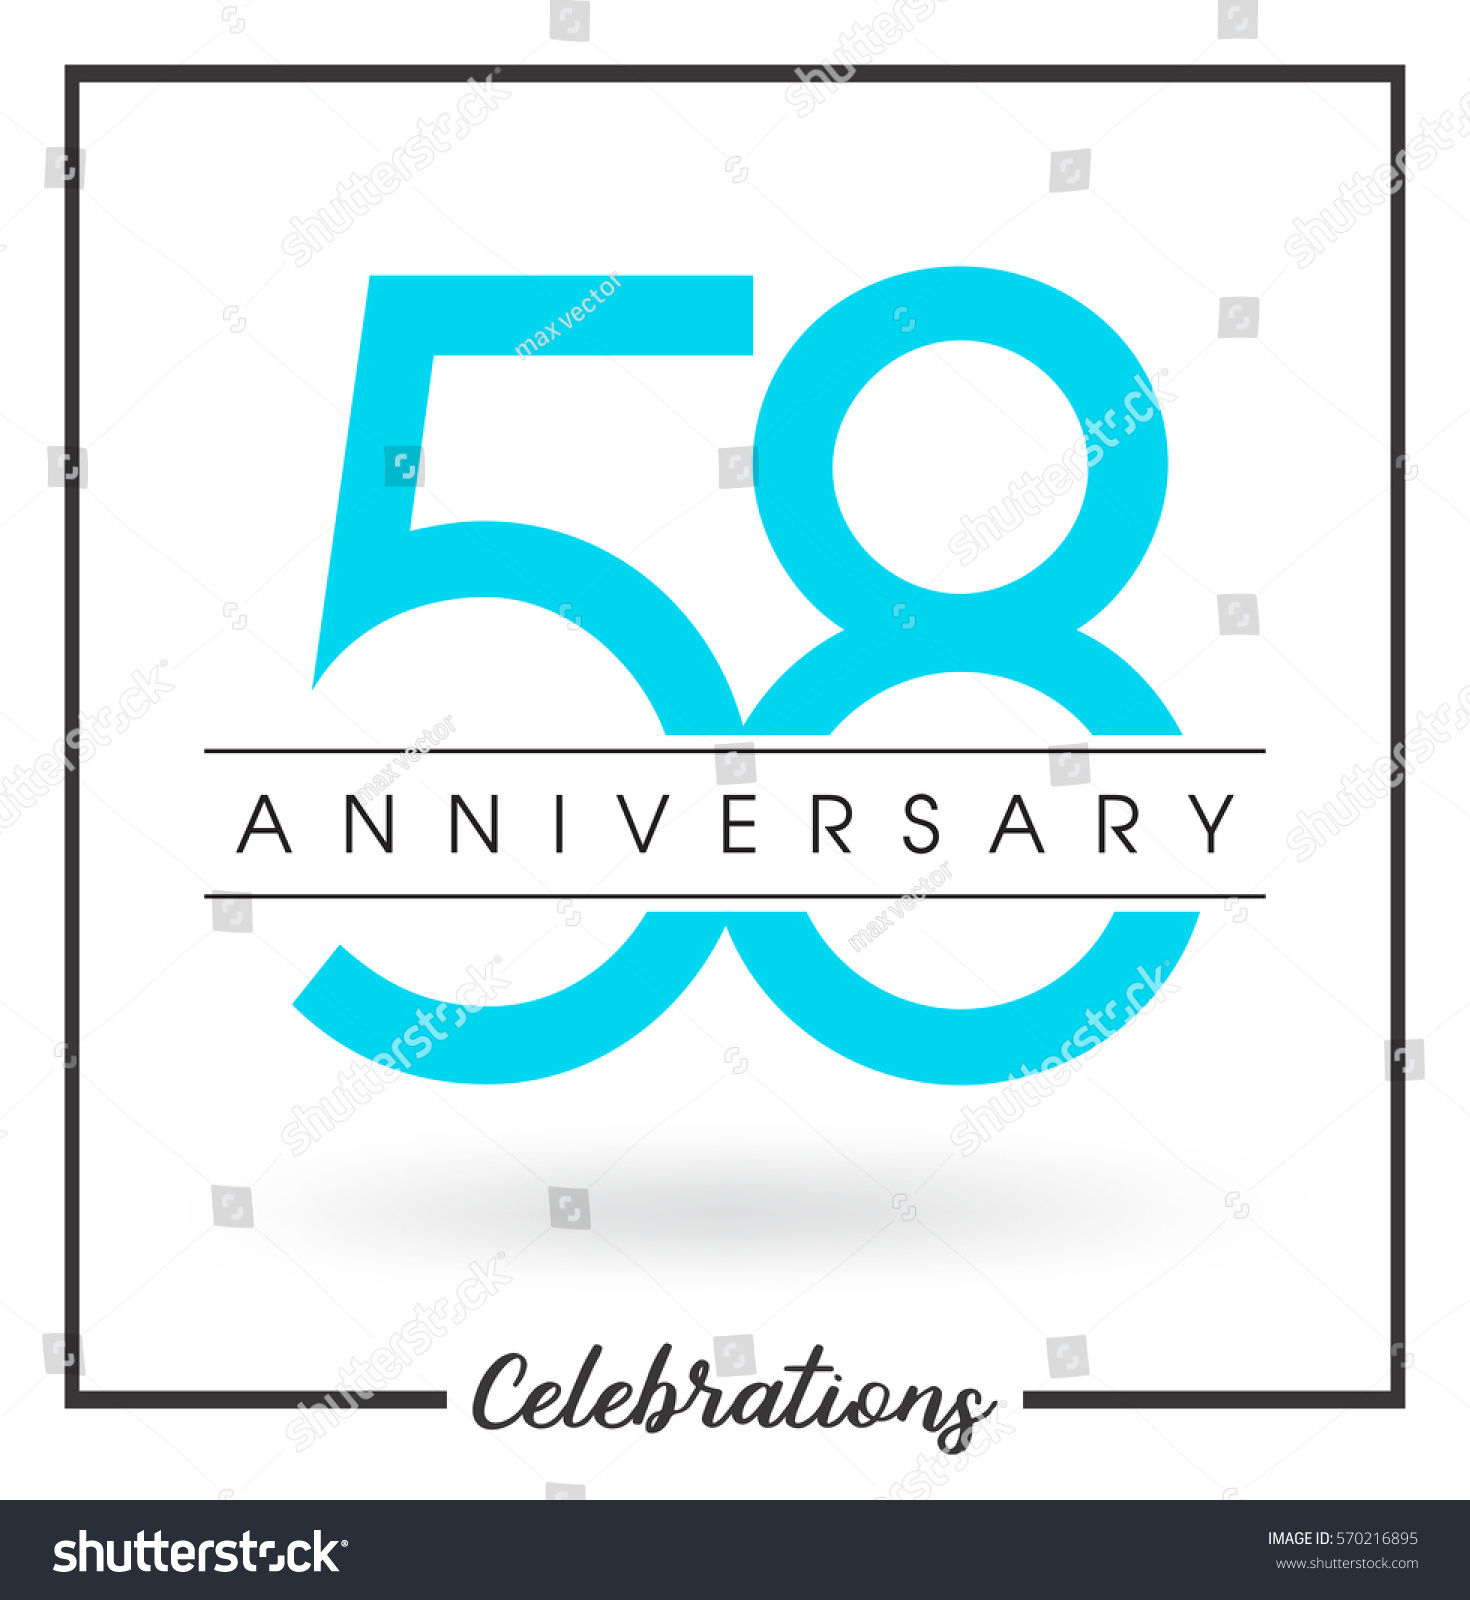 Anniversary emblems 58 anniversary template - Royalty Free Stock Vector ...